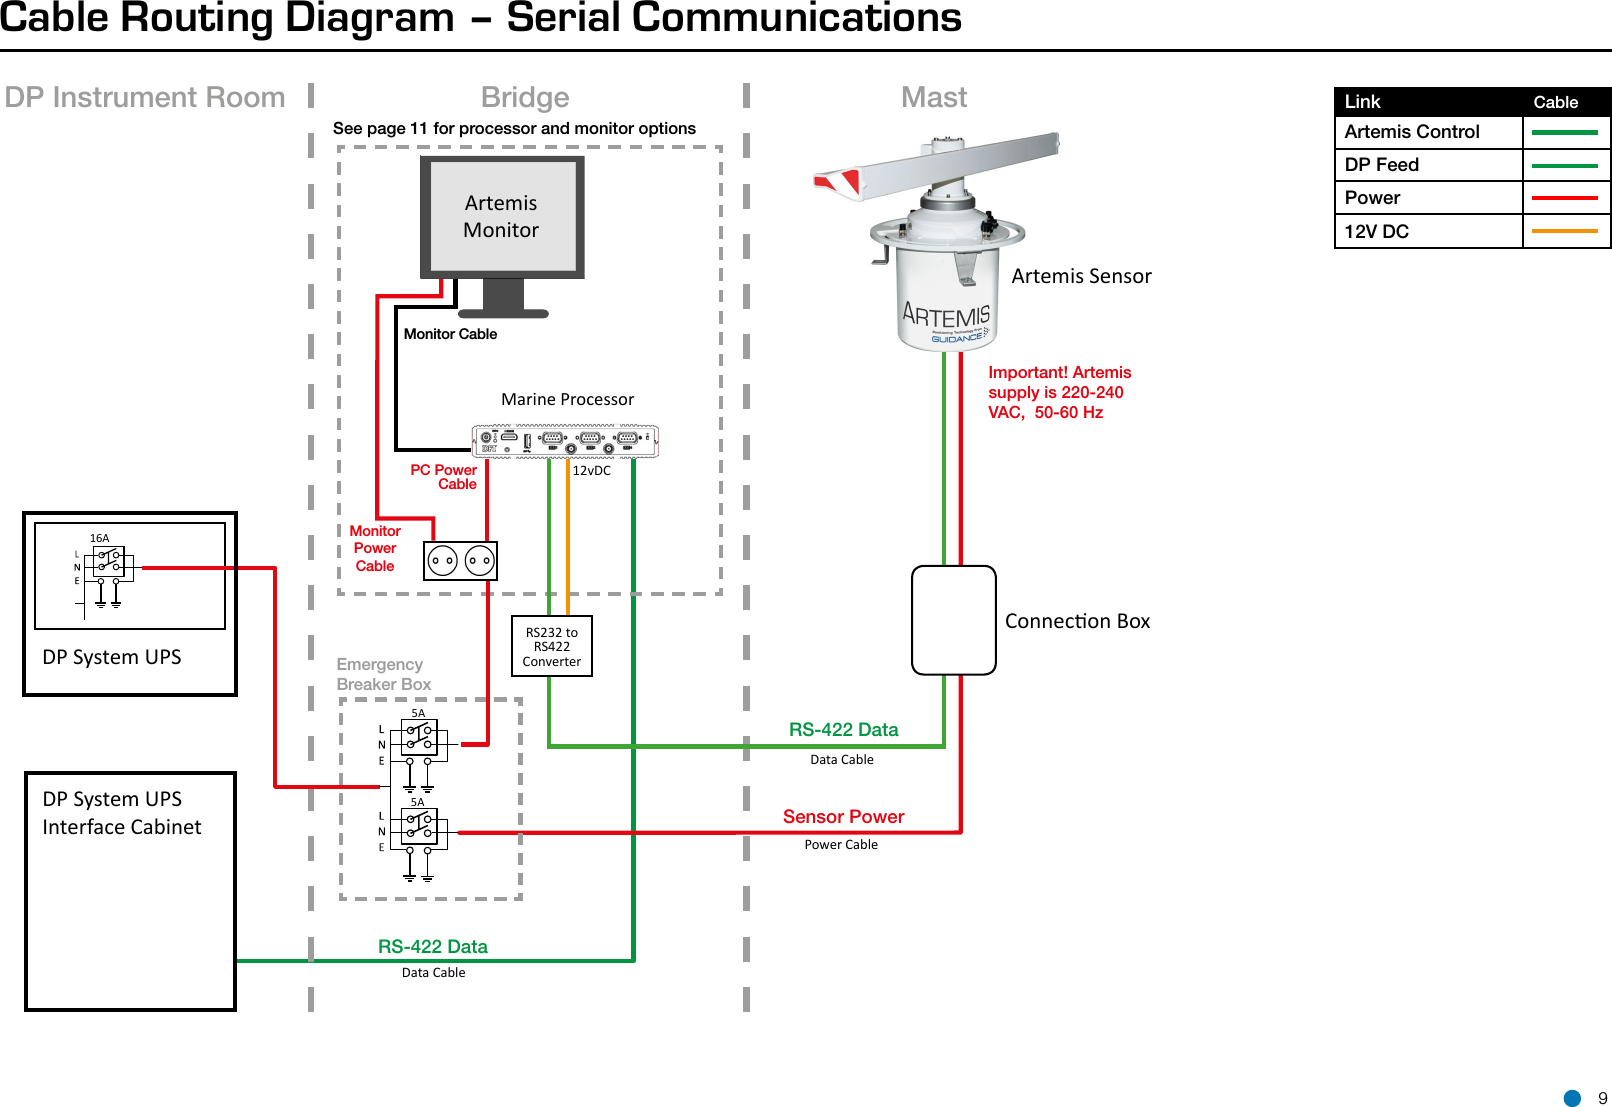 Cable Routing Diagram – Serial CommunicationsRS-422 DataSensor PowerRS-422 Data16A5ADP System UPSDP System UPS Interface CabinetArtemis MonitorMonitor CableDP Instrument Room Bridge MastEmergency Breaker BoxSee page 11 for processor and monitor options5AConnecon BoxPC PowerCableMonitor Power CableRS232 to RS422 ConverterMarine ProcessorData Cable12vDCData CablePower CableImportant! Artemis supply is 220-240 VAC,  50-60 HzLink                                 CableArtemis ControlDP FeedPower12V DCArtemis Sensor 9